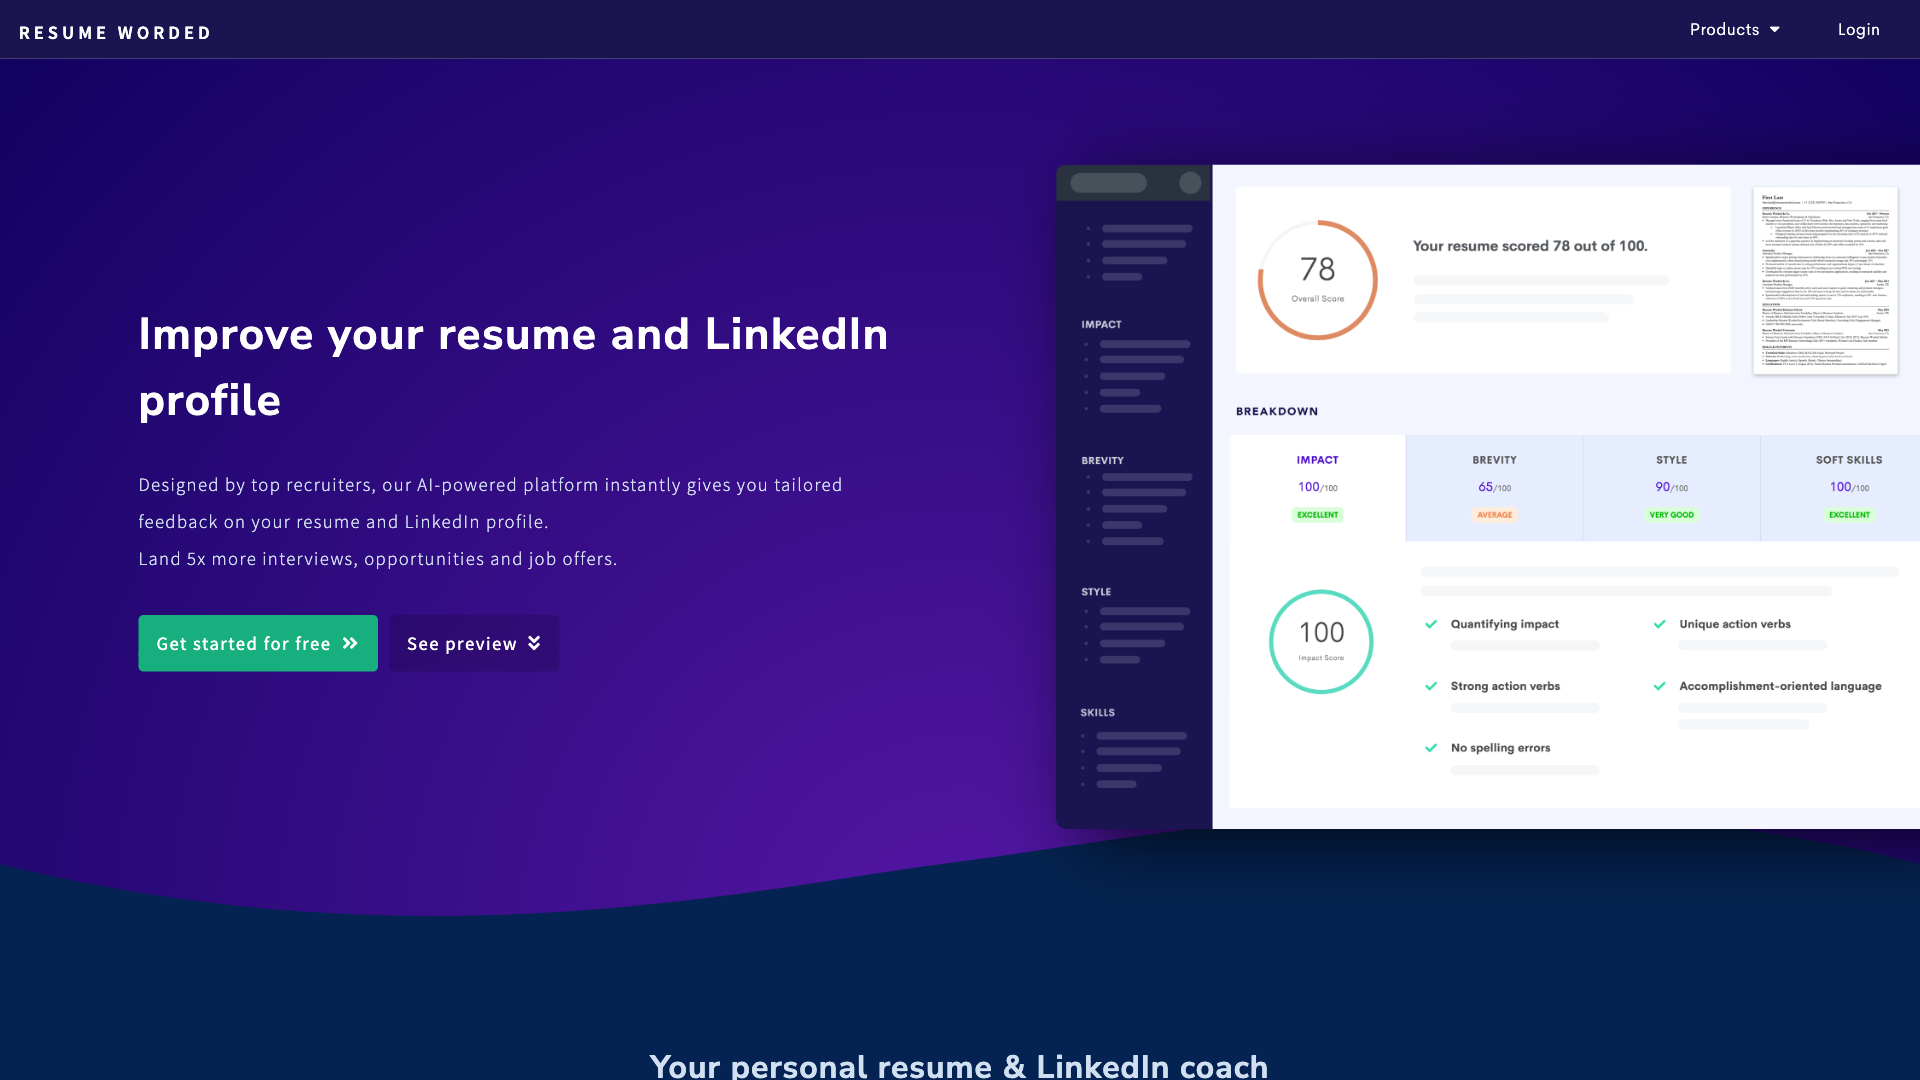 Display image for Resume Worded